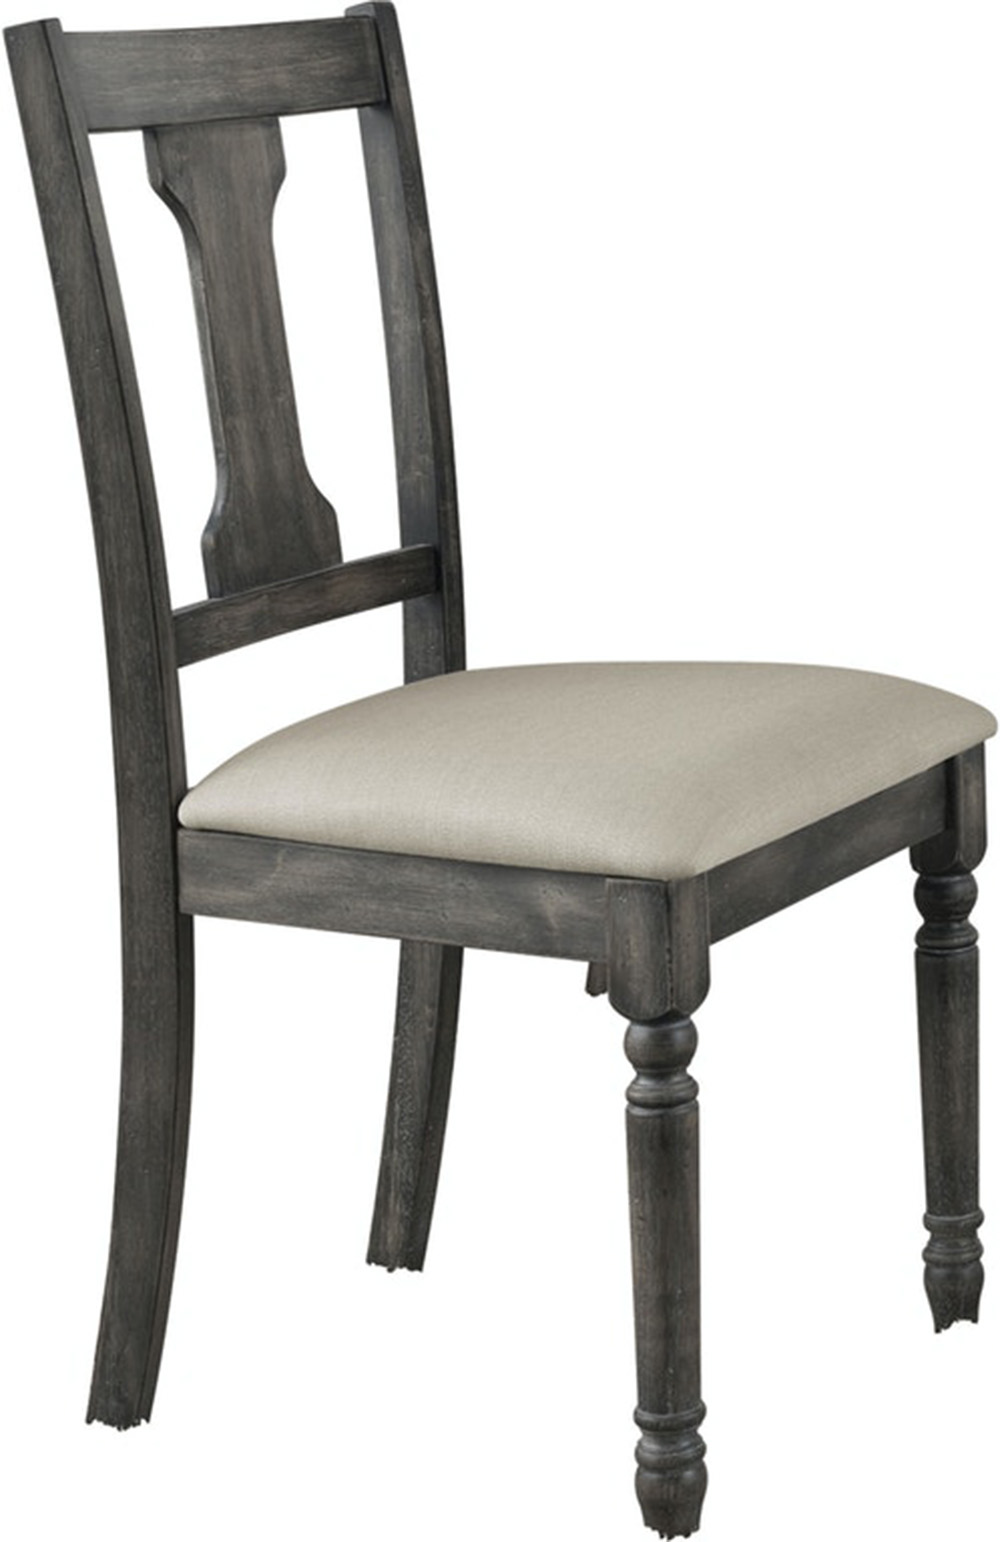 ACME Wallace Linen Upholstered Dining Chair Set of 2, with High Backrest, and Wood Legs, for Restaurant, Cafe, Tavern, Office, Living Room - Gray